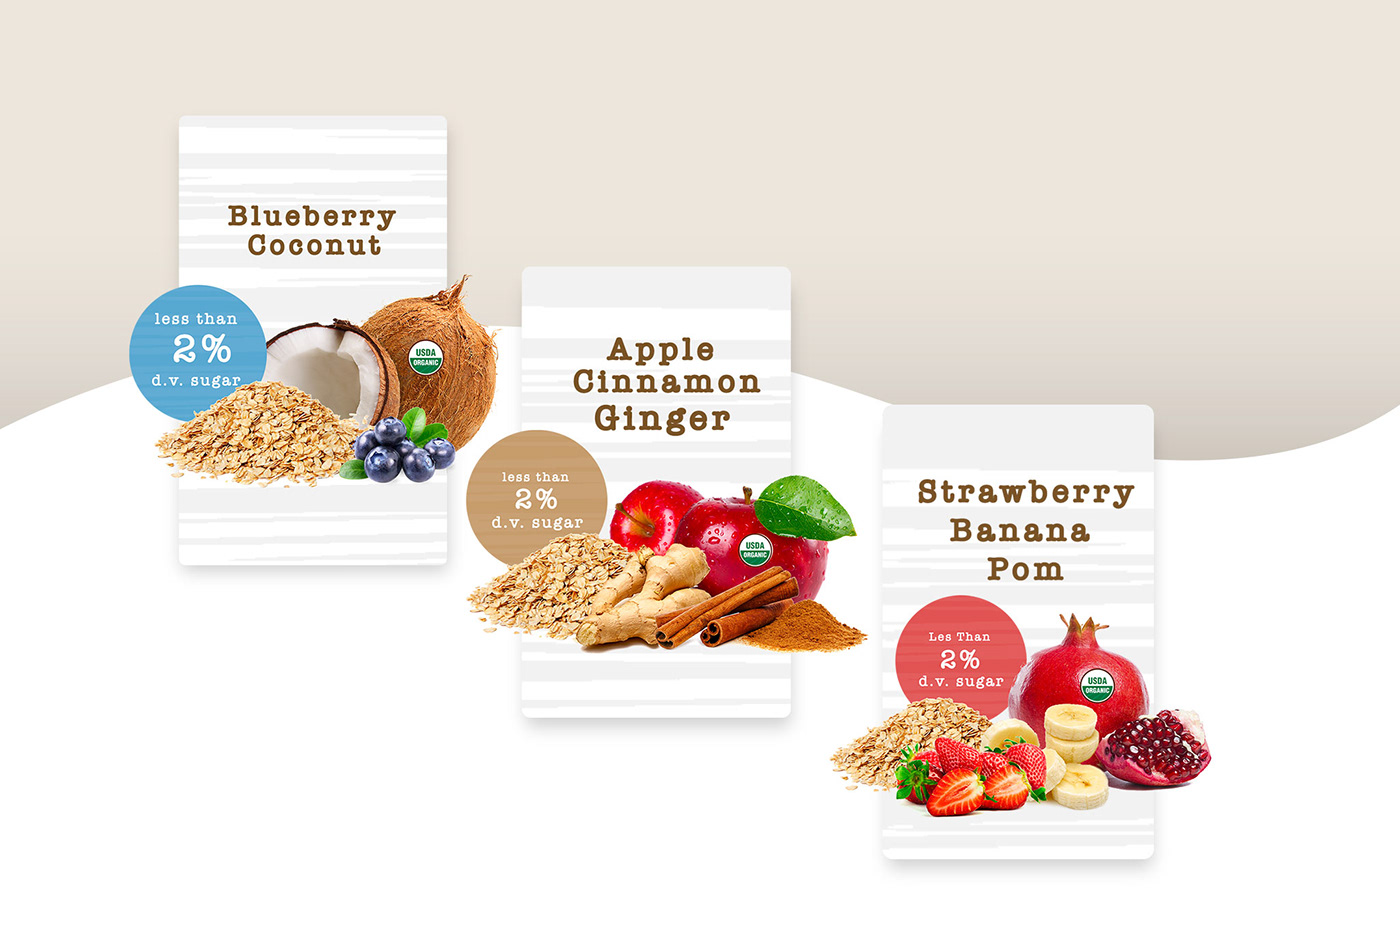 Labels for the rebranded Modernoats package designs including new organic fresh fruit flavors.